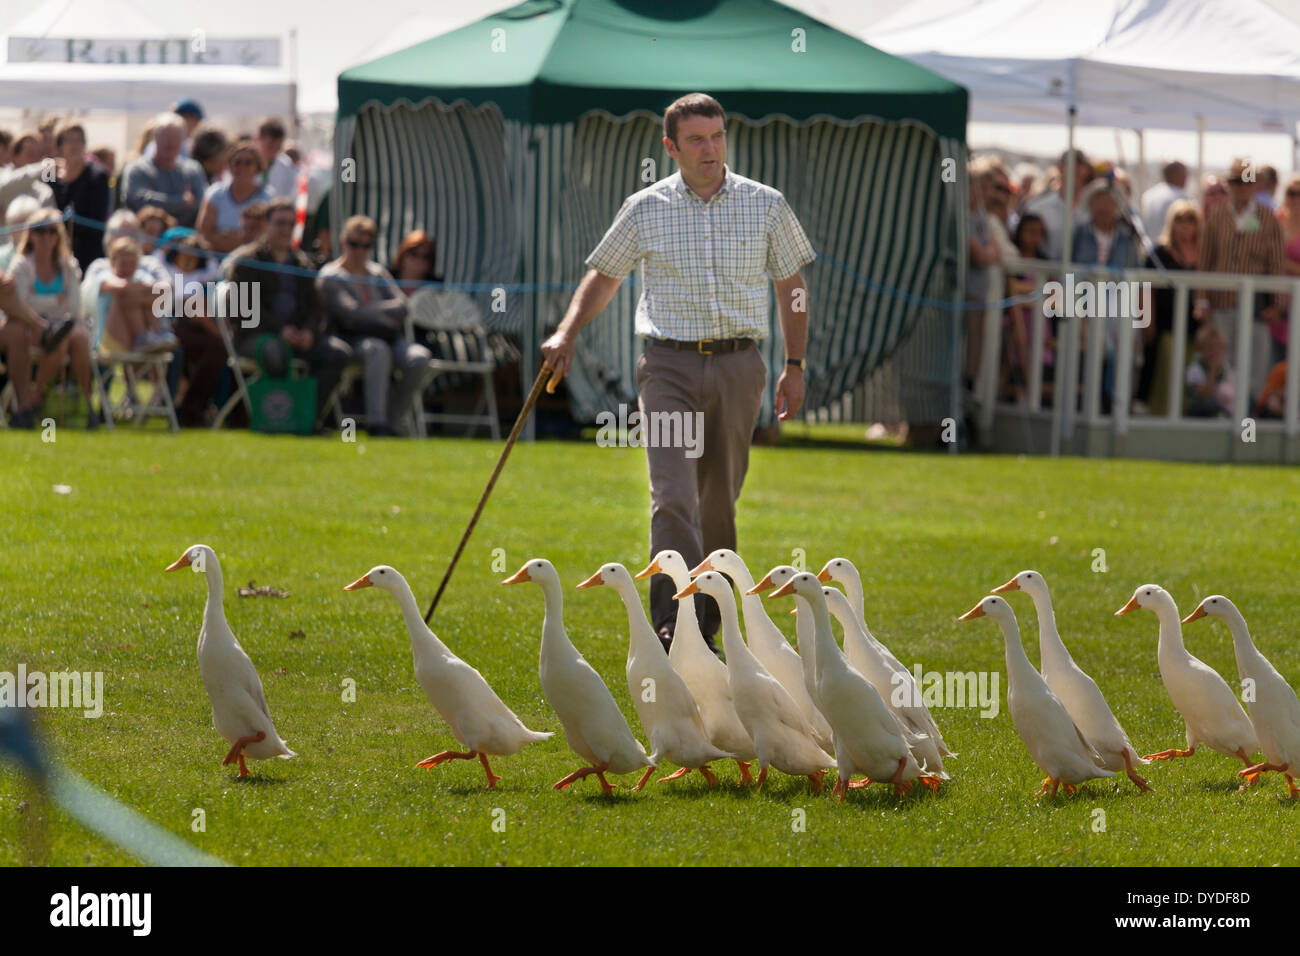 Sheepdog trial demonstration at country fair using indian runner ducks. Stock Photo